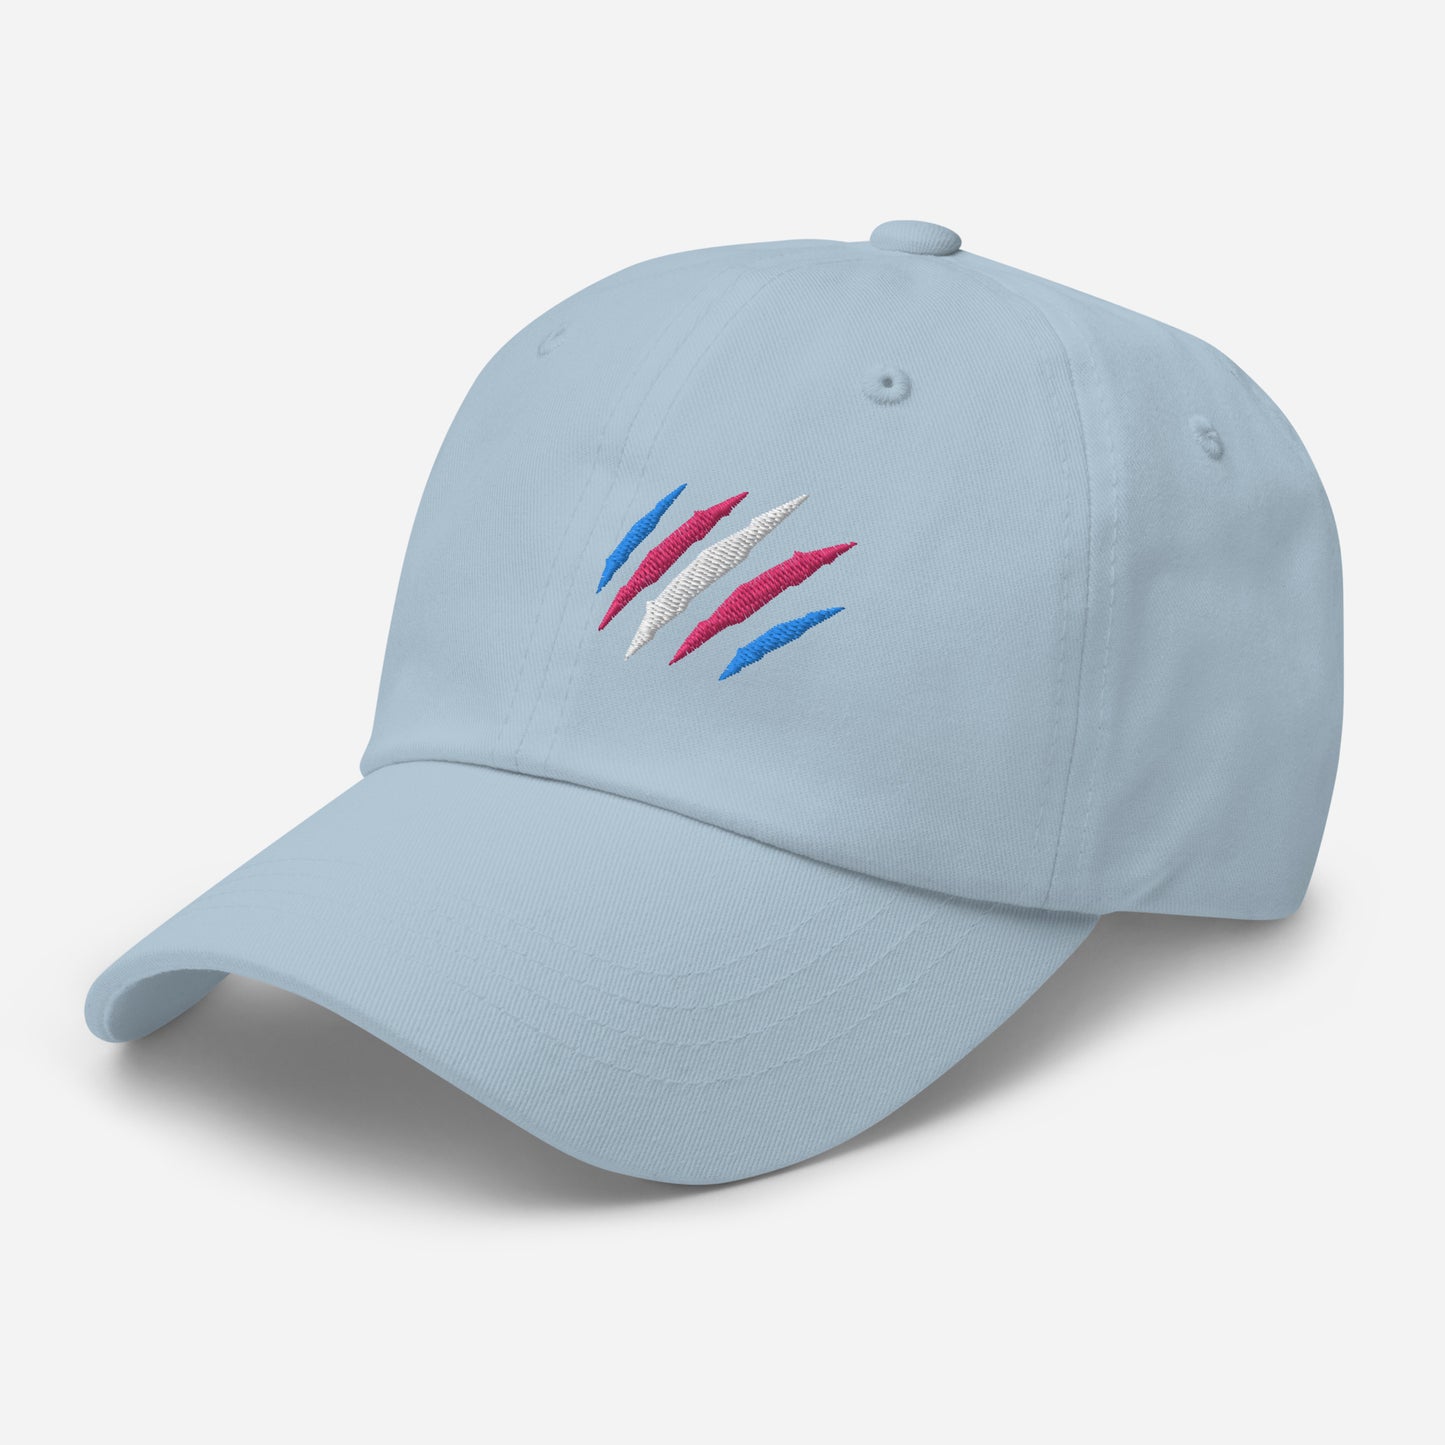 Light blue baseball hat featuring transgender pride scratch mark embroidery with a low profile, adjustable strap.